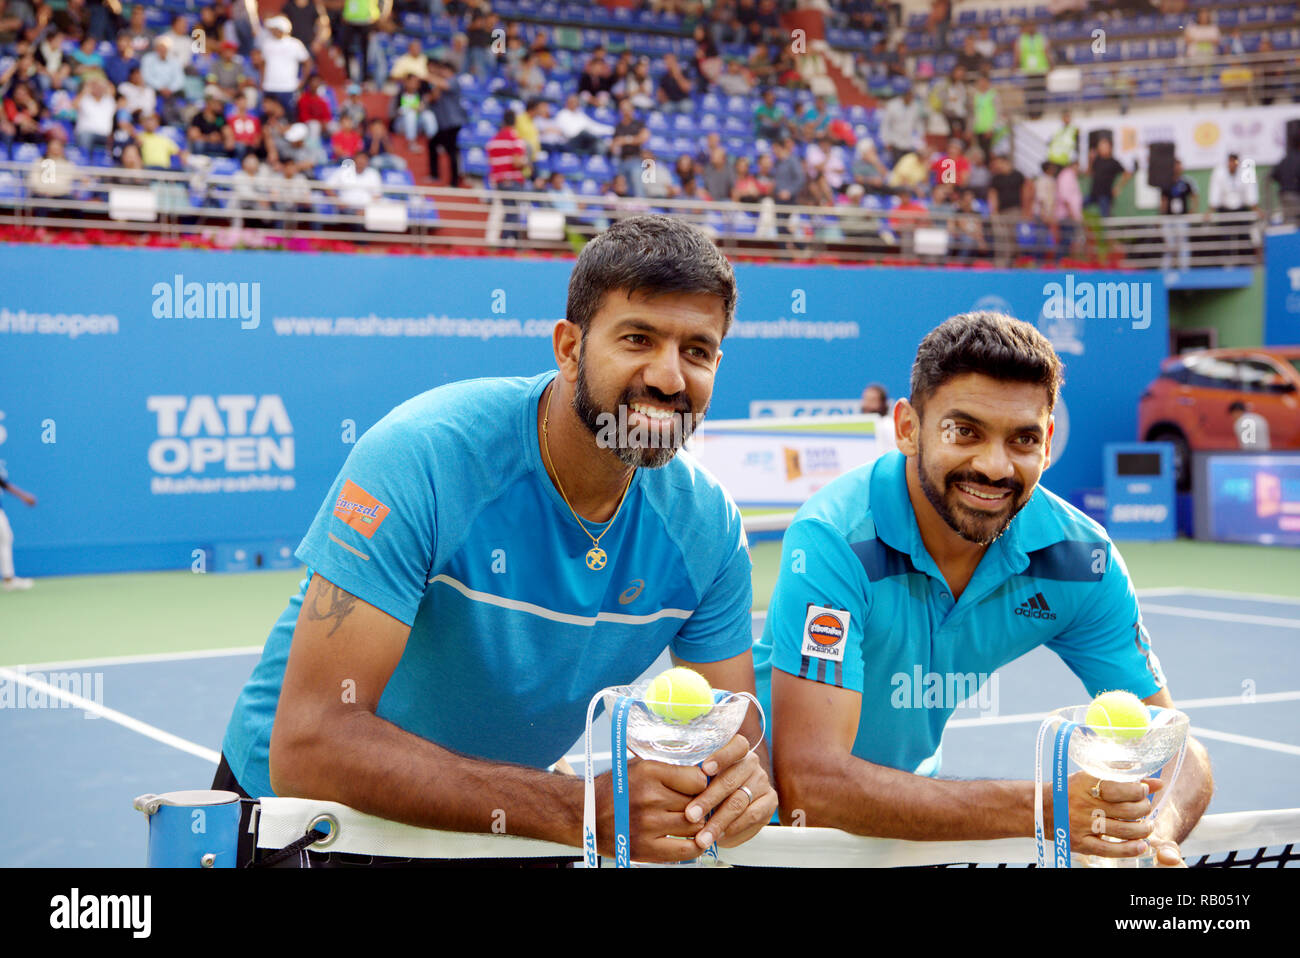 Pune, India. 5th January 2019. Rohan Bopanna and Divij Sharan, both of  India, pose with their doubles championship trophies won at Tata Open  Maharashtra ATP Tennis tournament in Pune, India. Credit: Karunesh